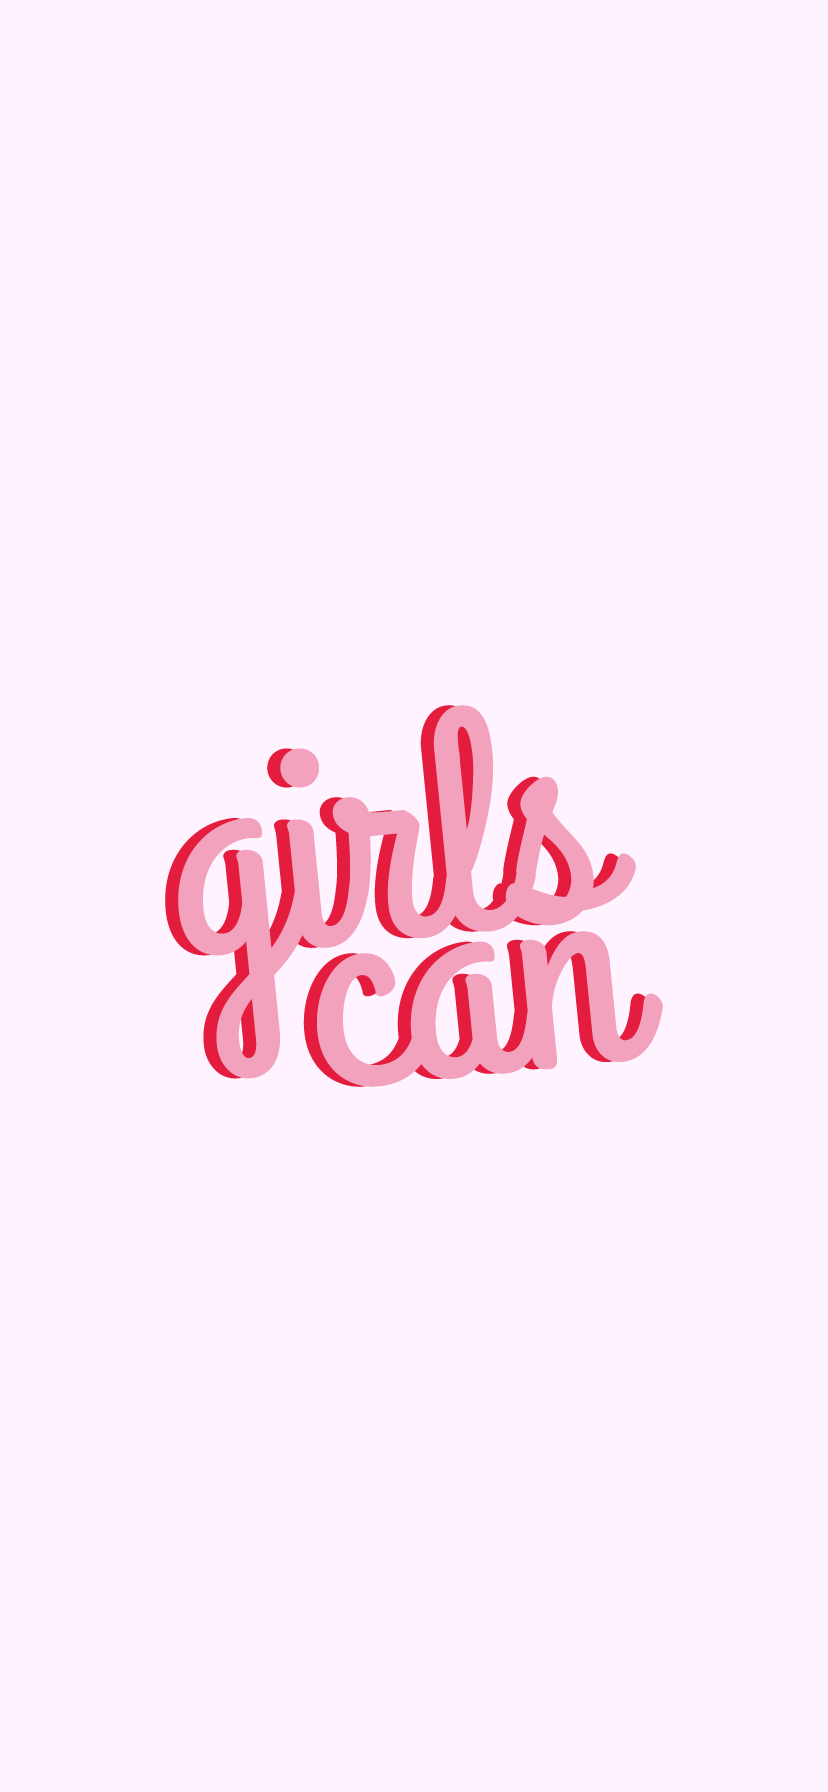 Girls Can Women Courage Quote White Version Sticker By Isabelle